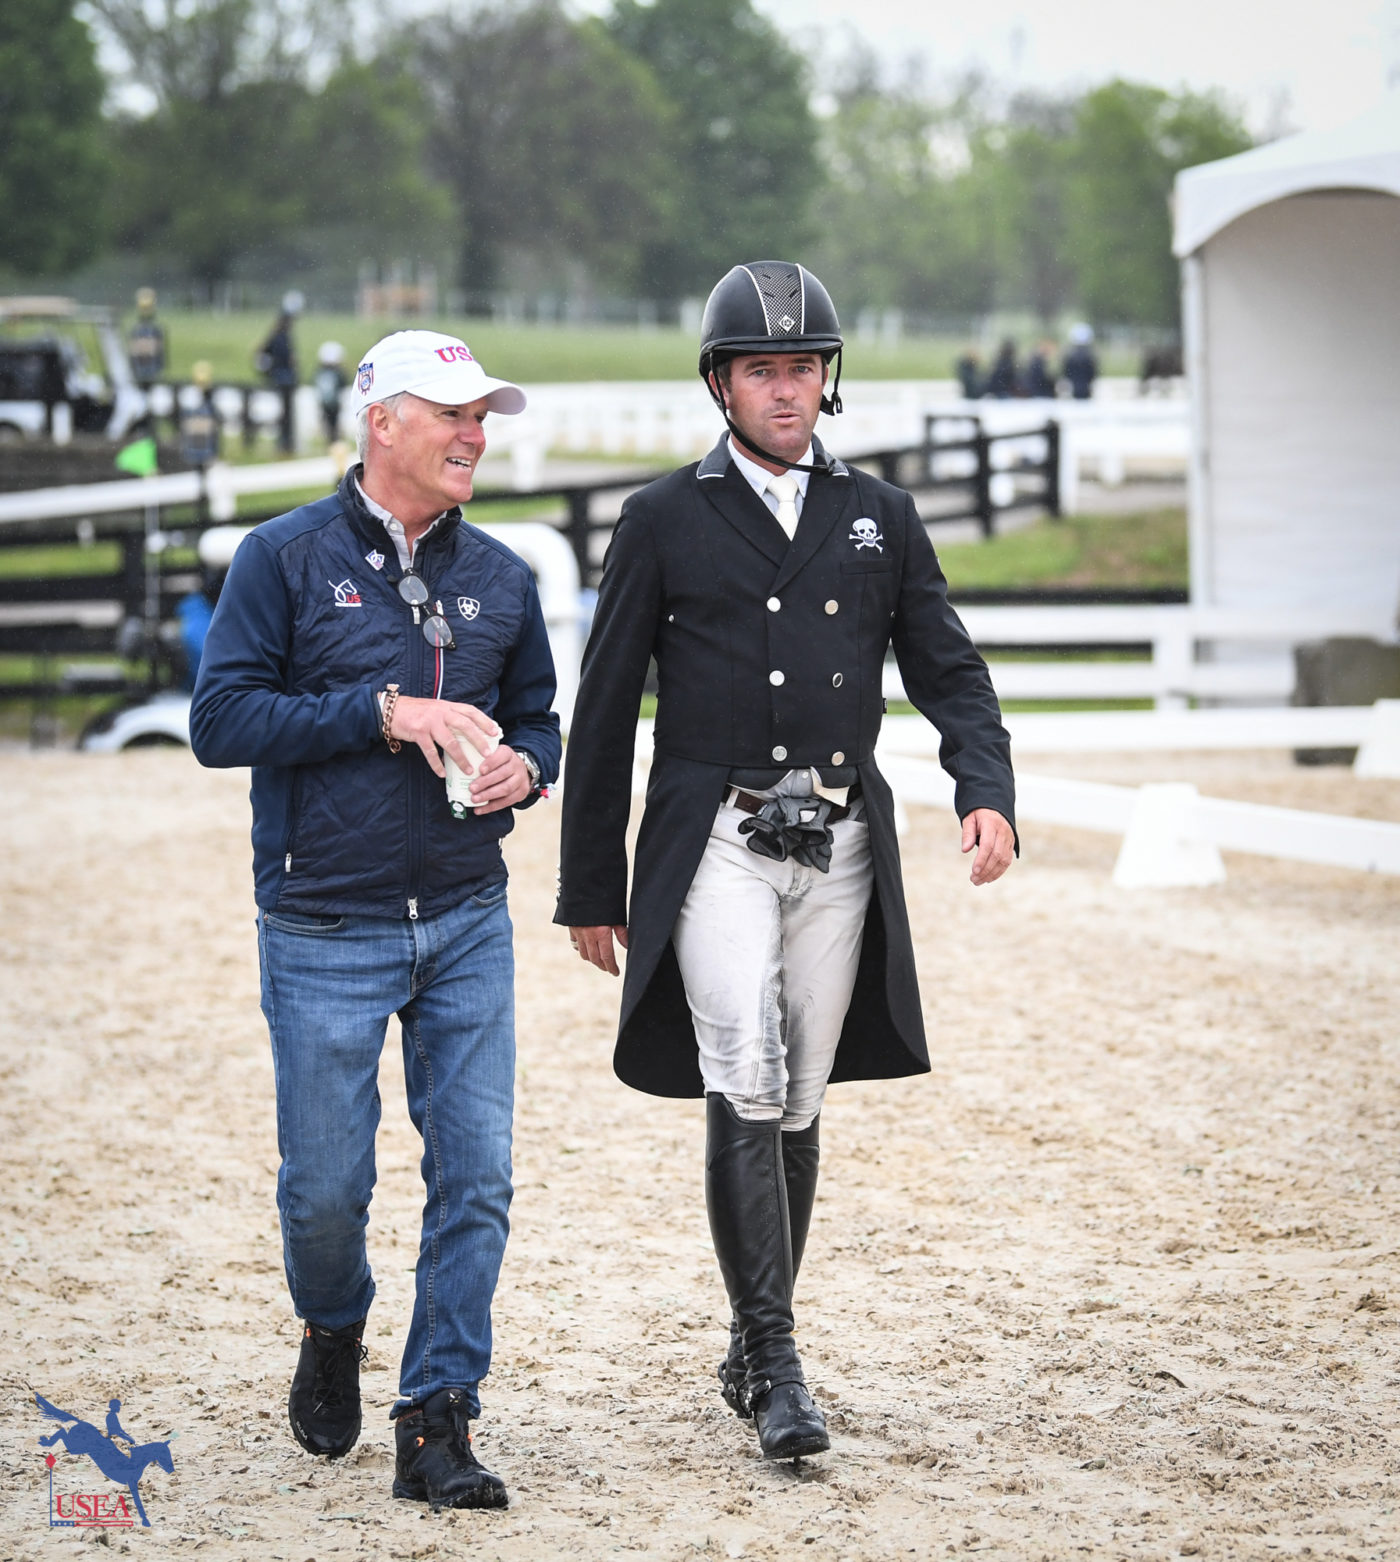 Bobby Costello (left) walked with Will Faudree. USEA/Lindsay Berreth photo